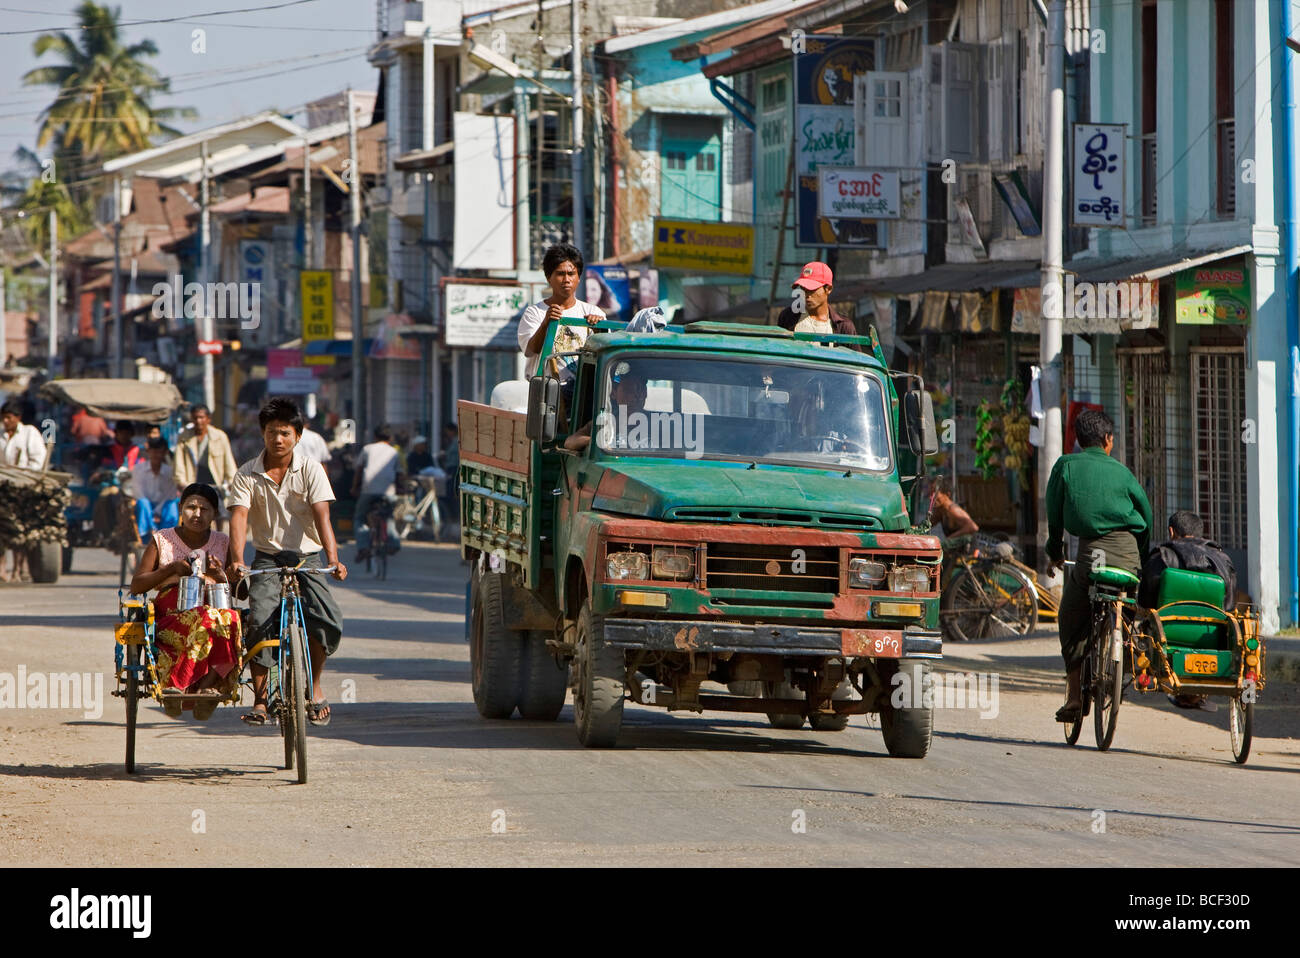 Myanmar, Burma, Rakhine State, Sittwe. A busy street scene in Sittwe.  Bicycle taxis, known as a trishaws. Stock Photo